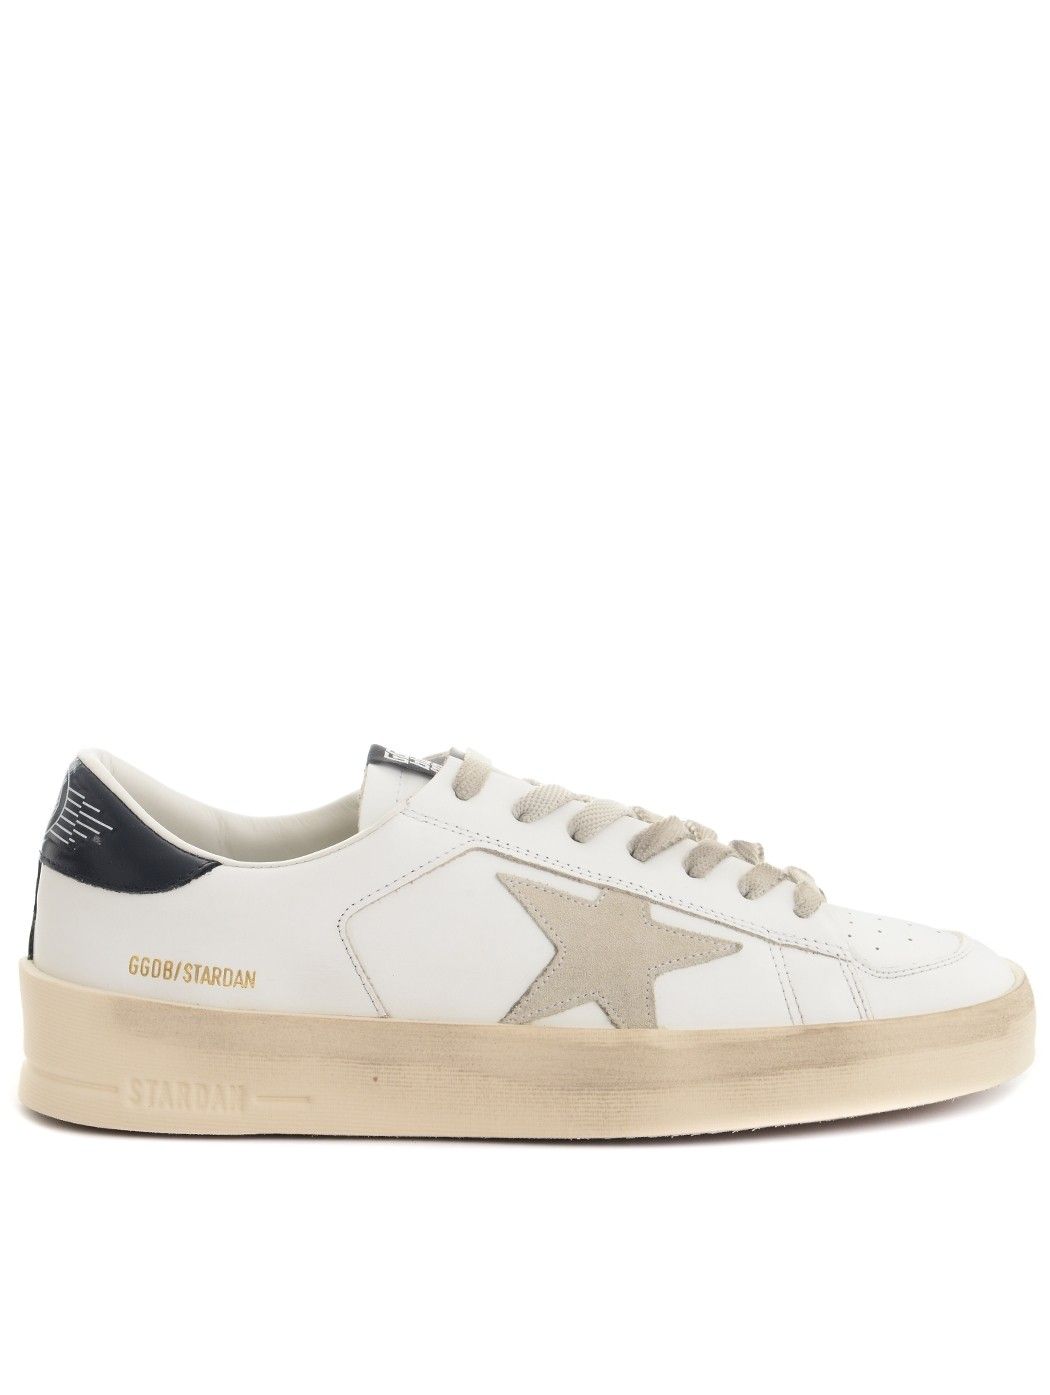  MAN SHOES,SPRING SUMMER SHOES,CHURCH'S SHOES,DIADORA HERITAGE SHOES,DIADORA HERITAGE SNEAKERS,GOLDEN GOOSE SHOES,GOLDEN GOOSE SNEAKERS  GOLDEN GOOSE GMF00128